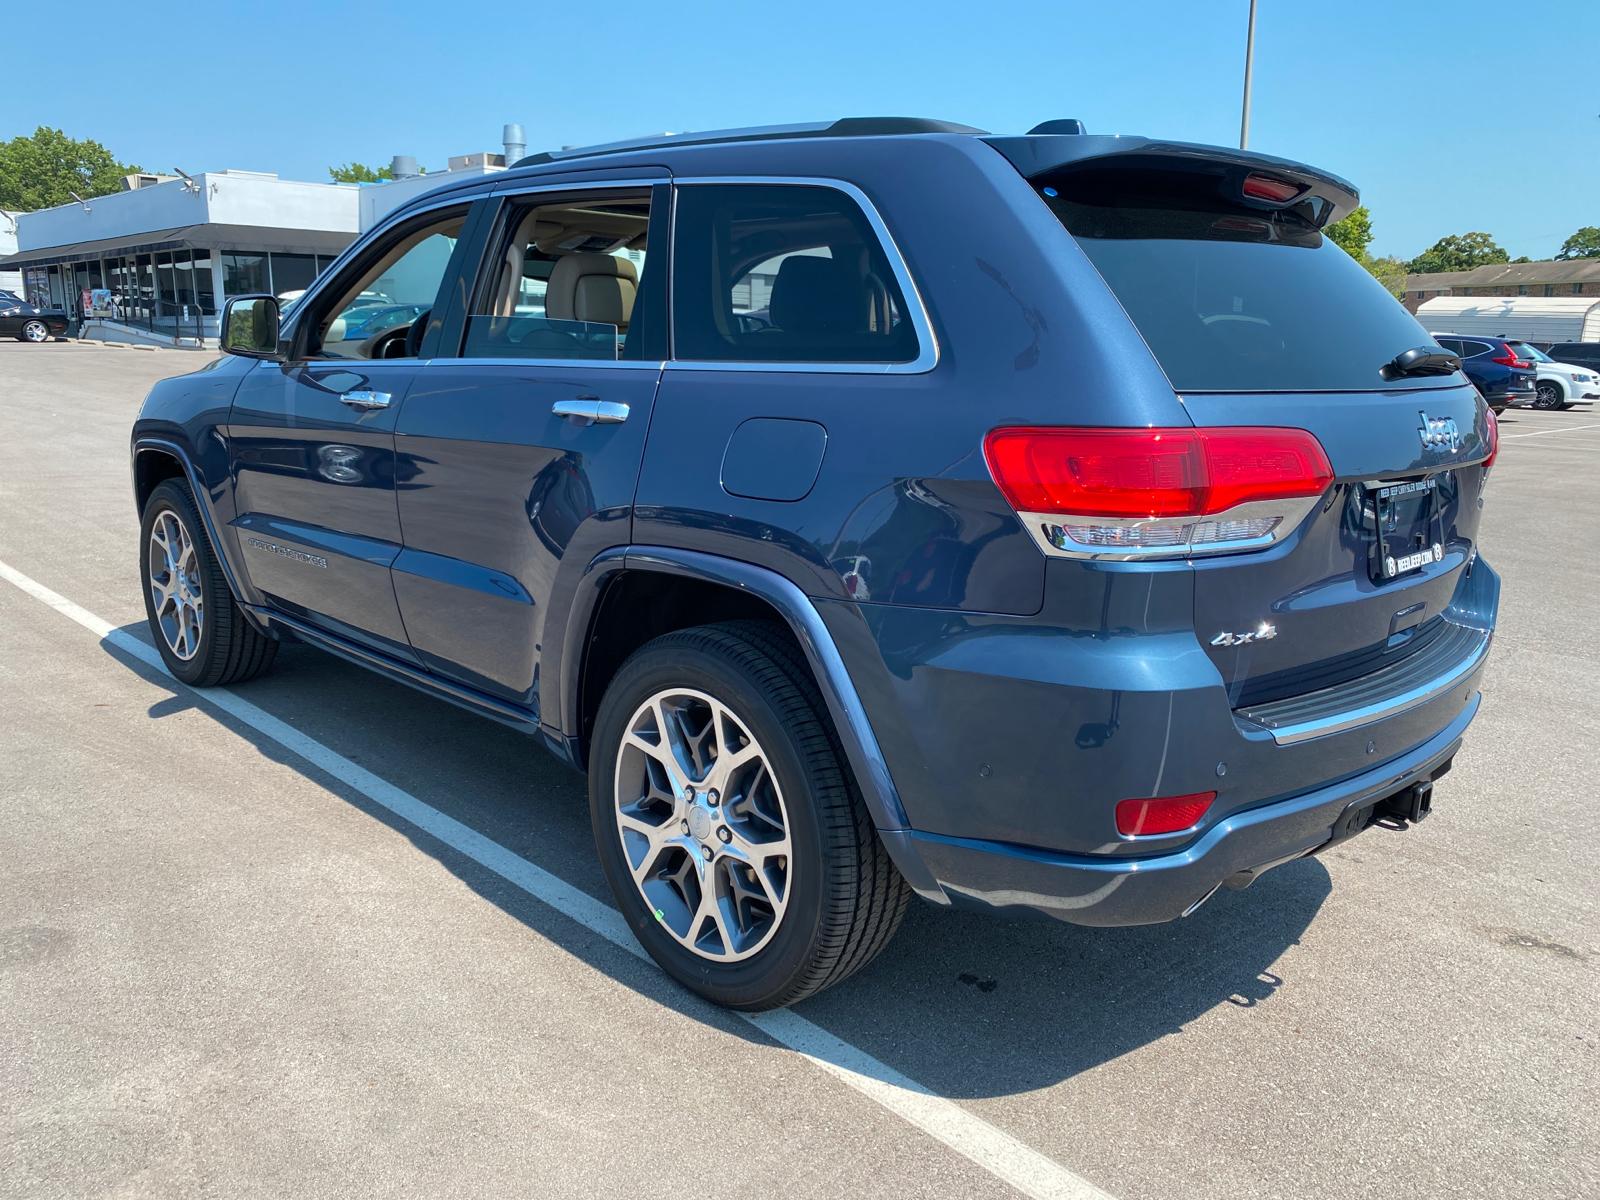 New 2020 JEEP Grand Cherokee Overland 4×4 Sport Utility in